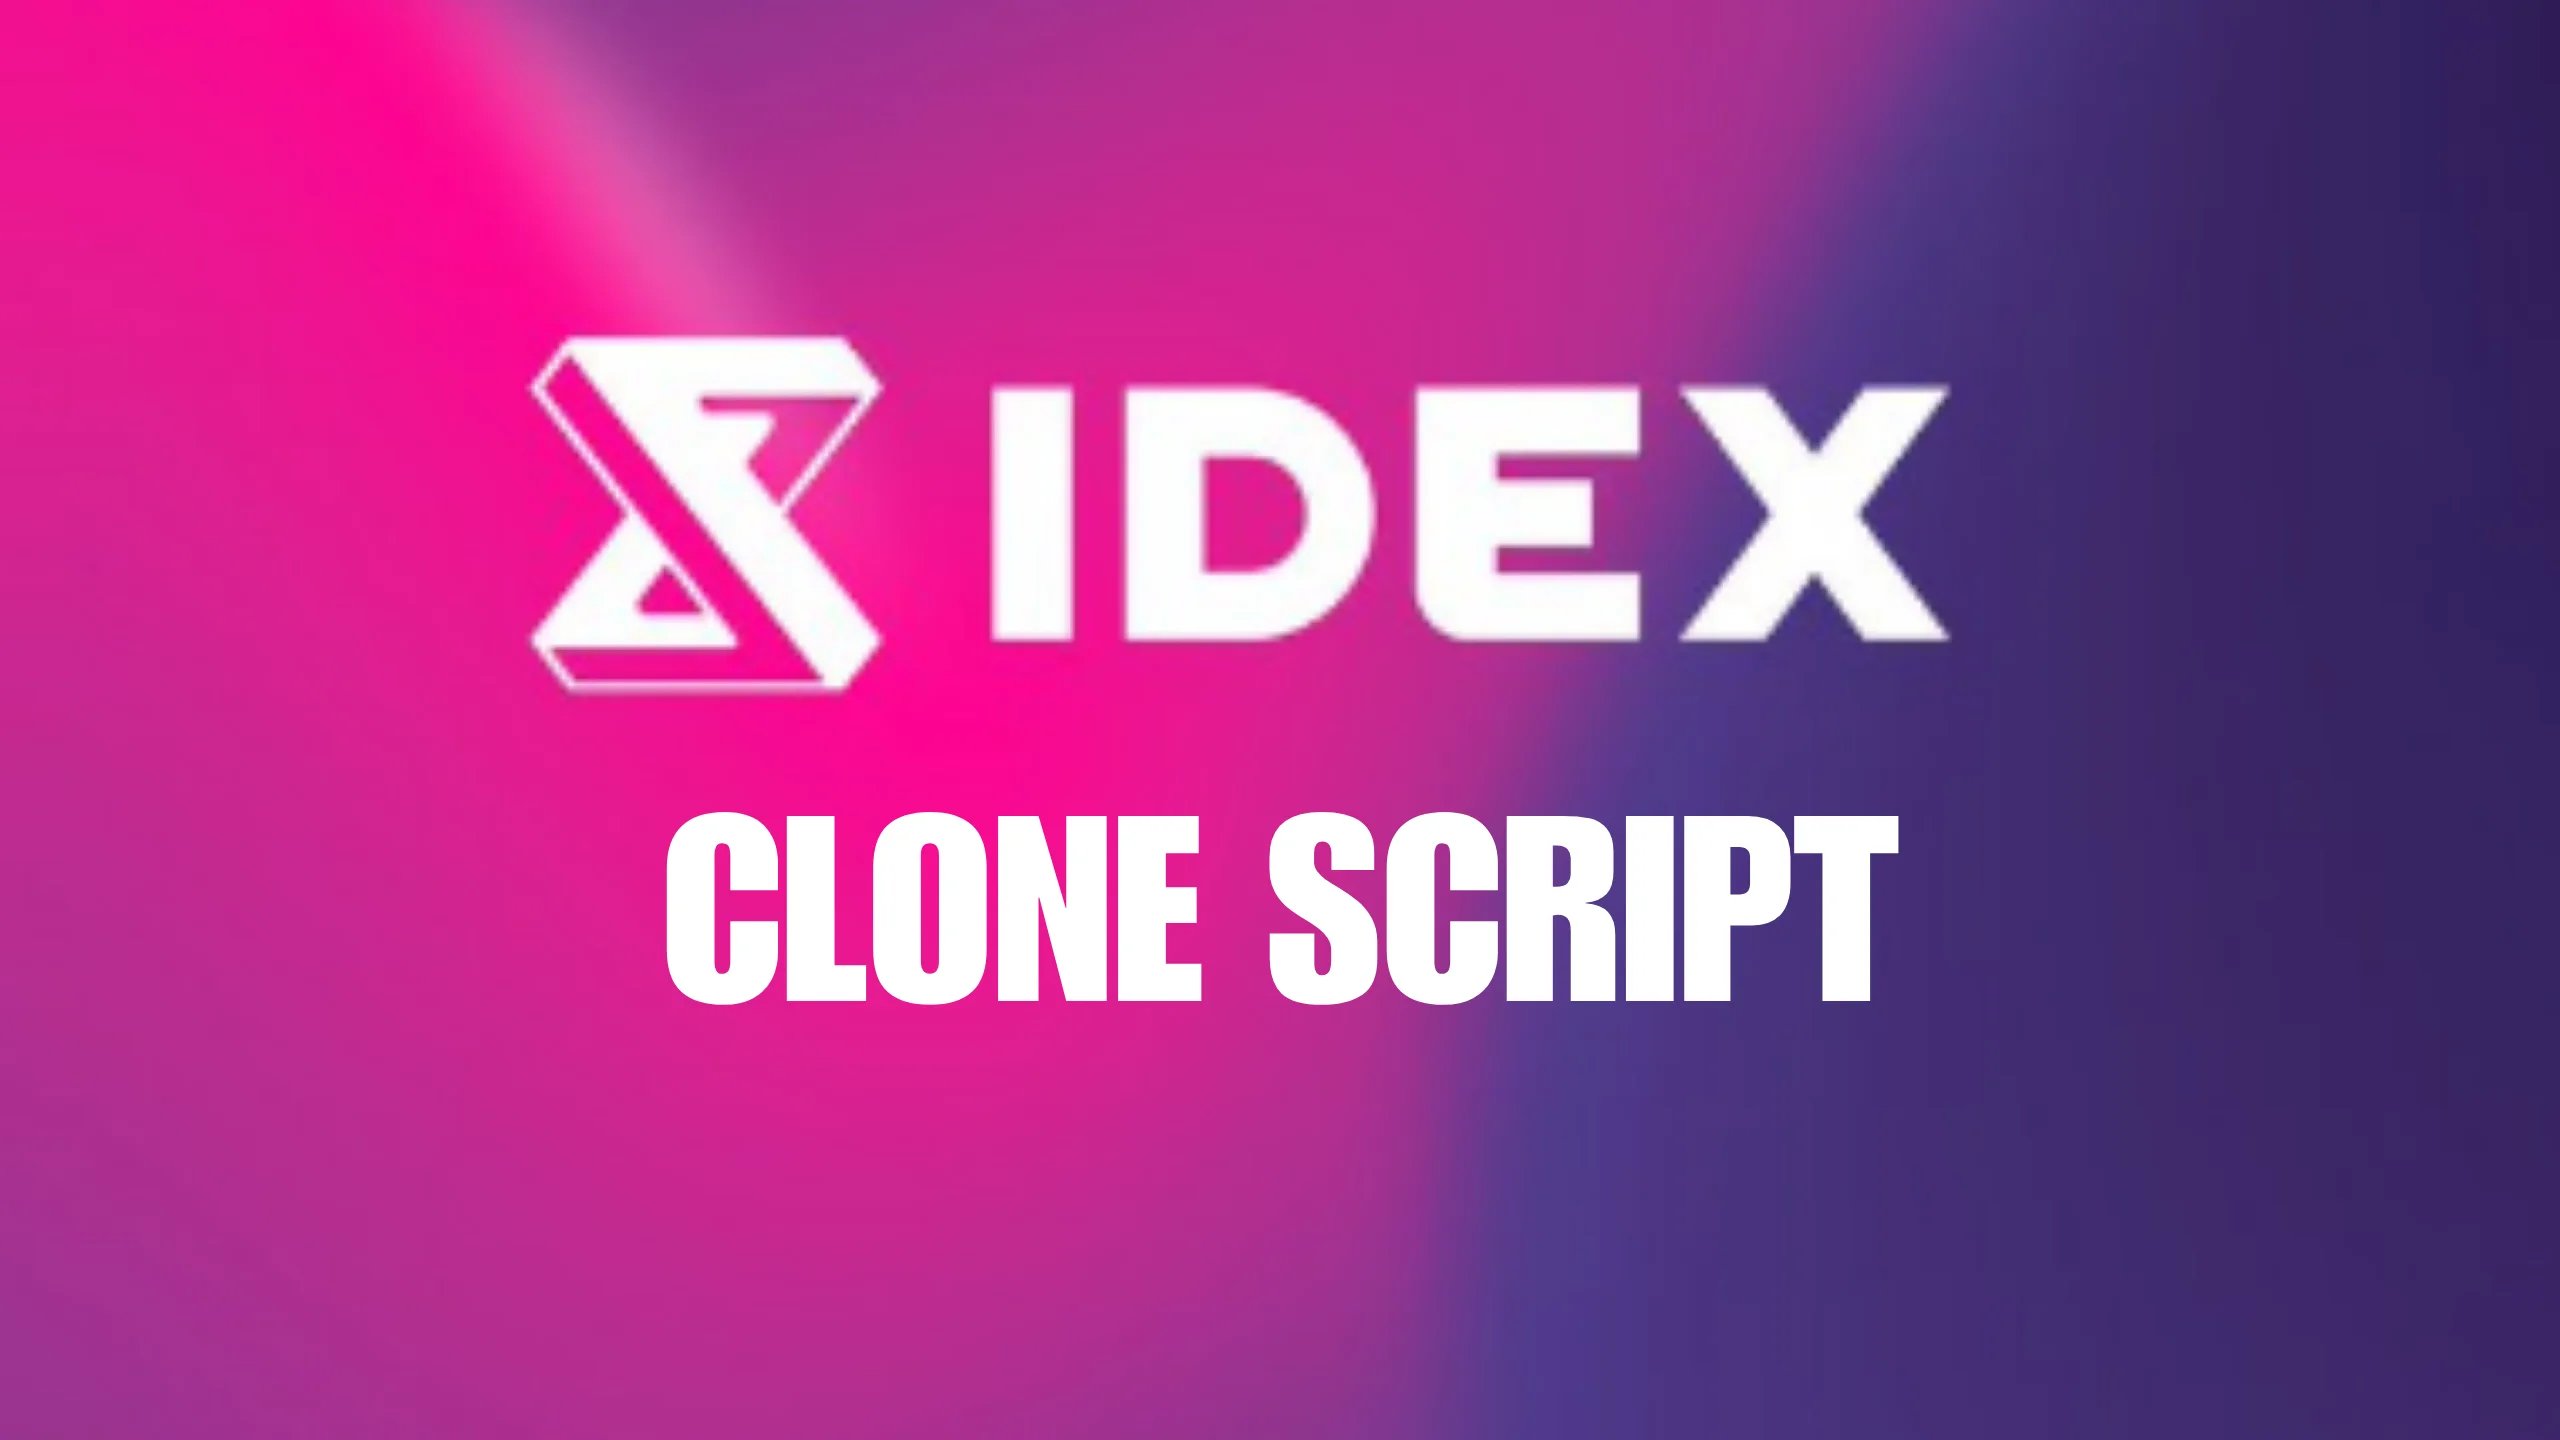 Infographic presenting the market overview of the IDEX Clone Script, including adoption rates, key features, and competitive analysis.